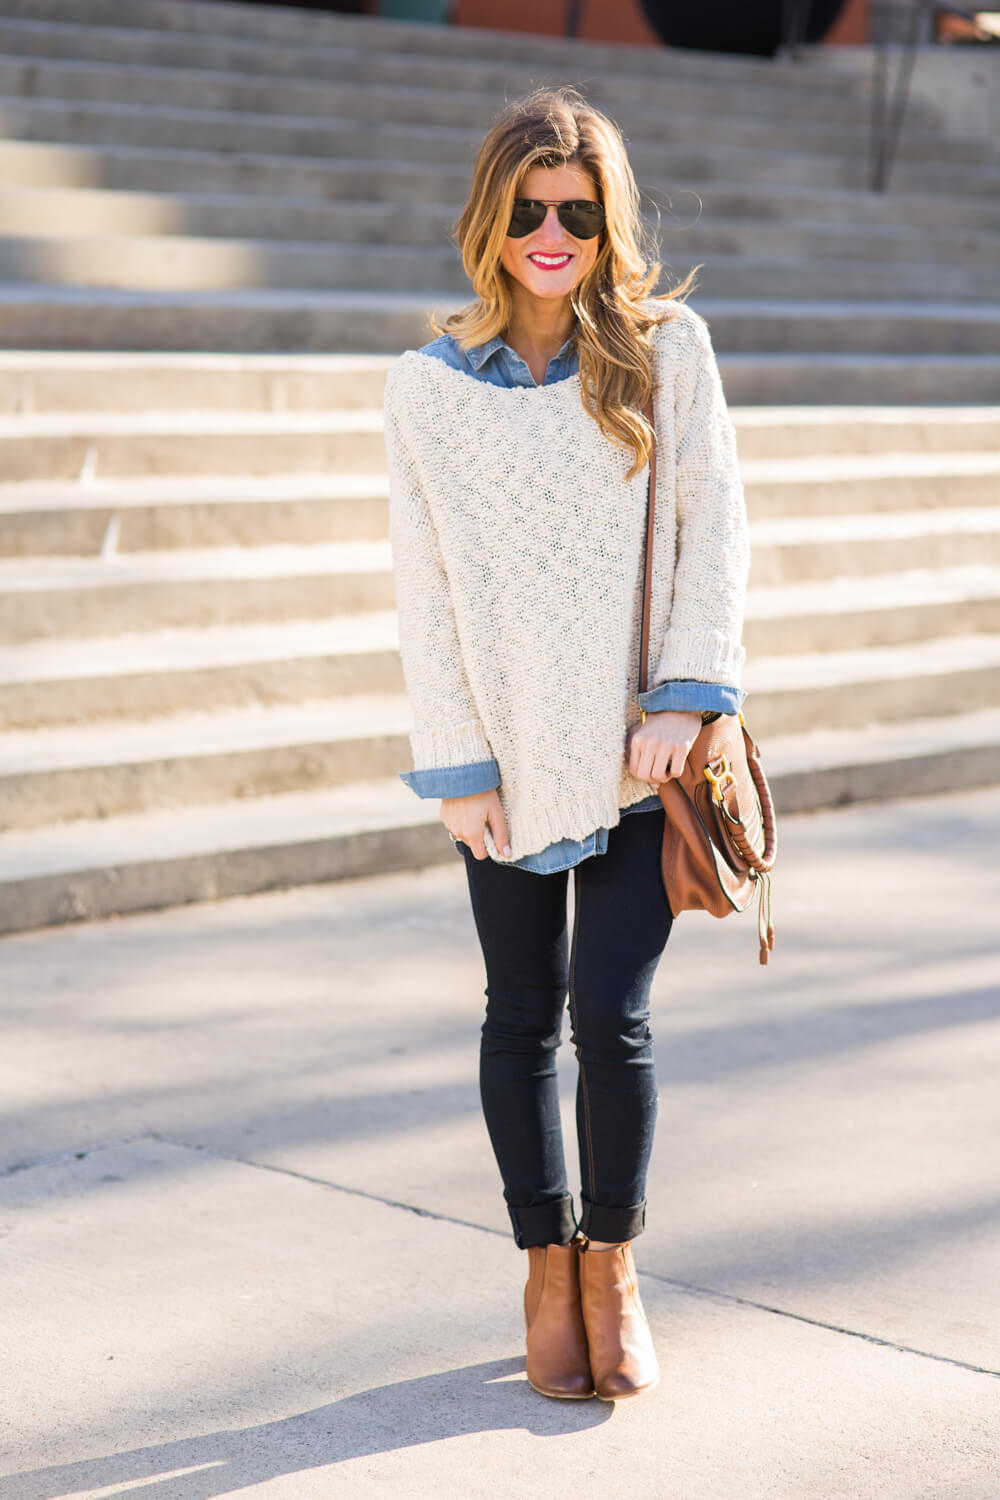 white sweater + chambray shirt + skinny jeans + booties + crossbody bag